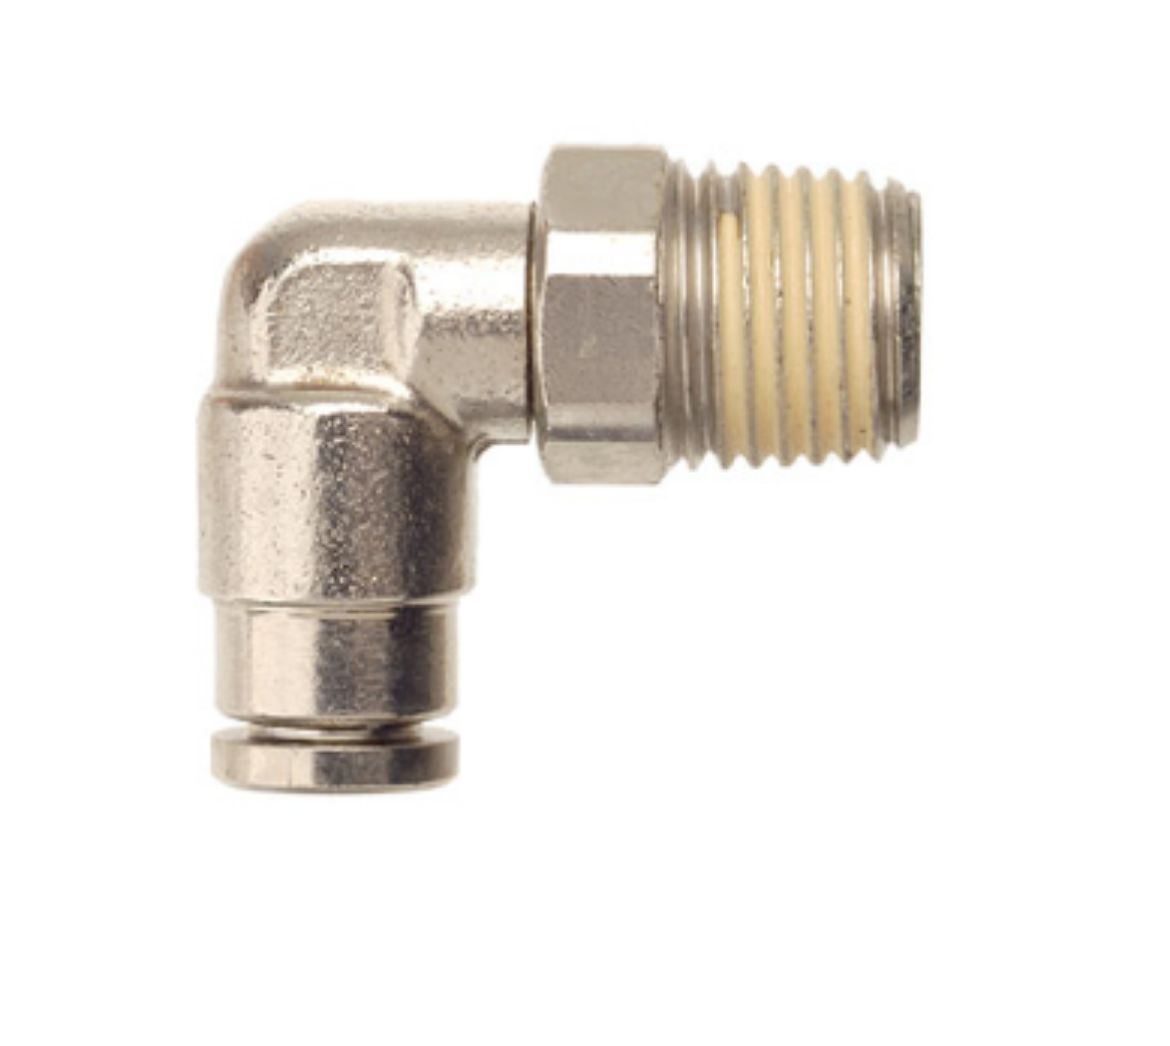 Picture of QFM5NP 10mmx1/2 MI BSPT Swivel Elbow Nickel Plated